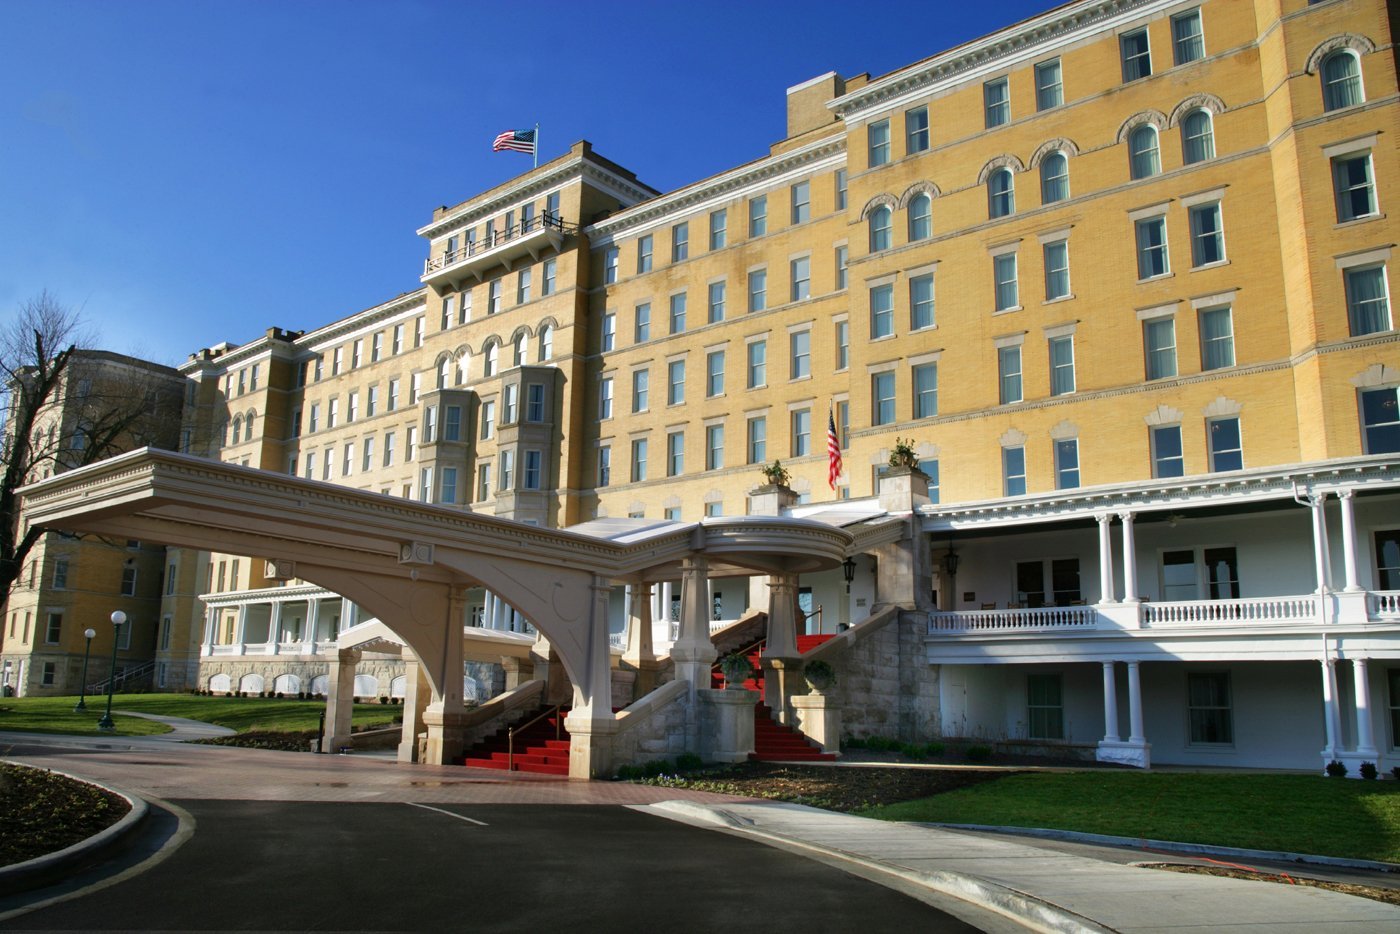 Earthshine reccomend French lick springss hotel